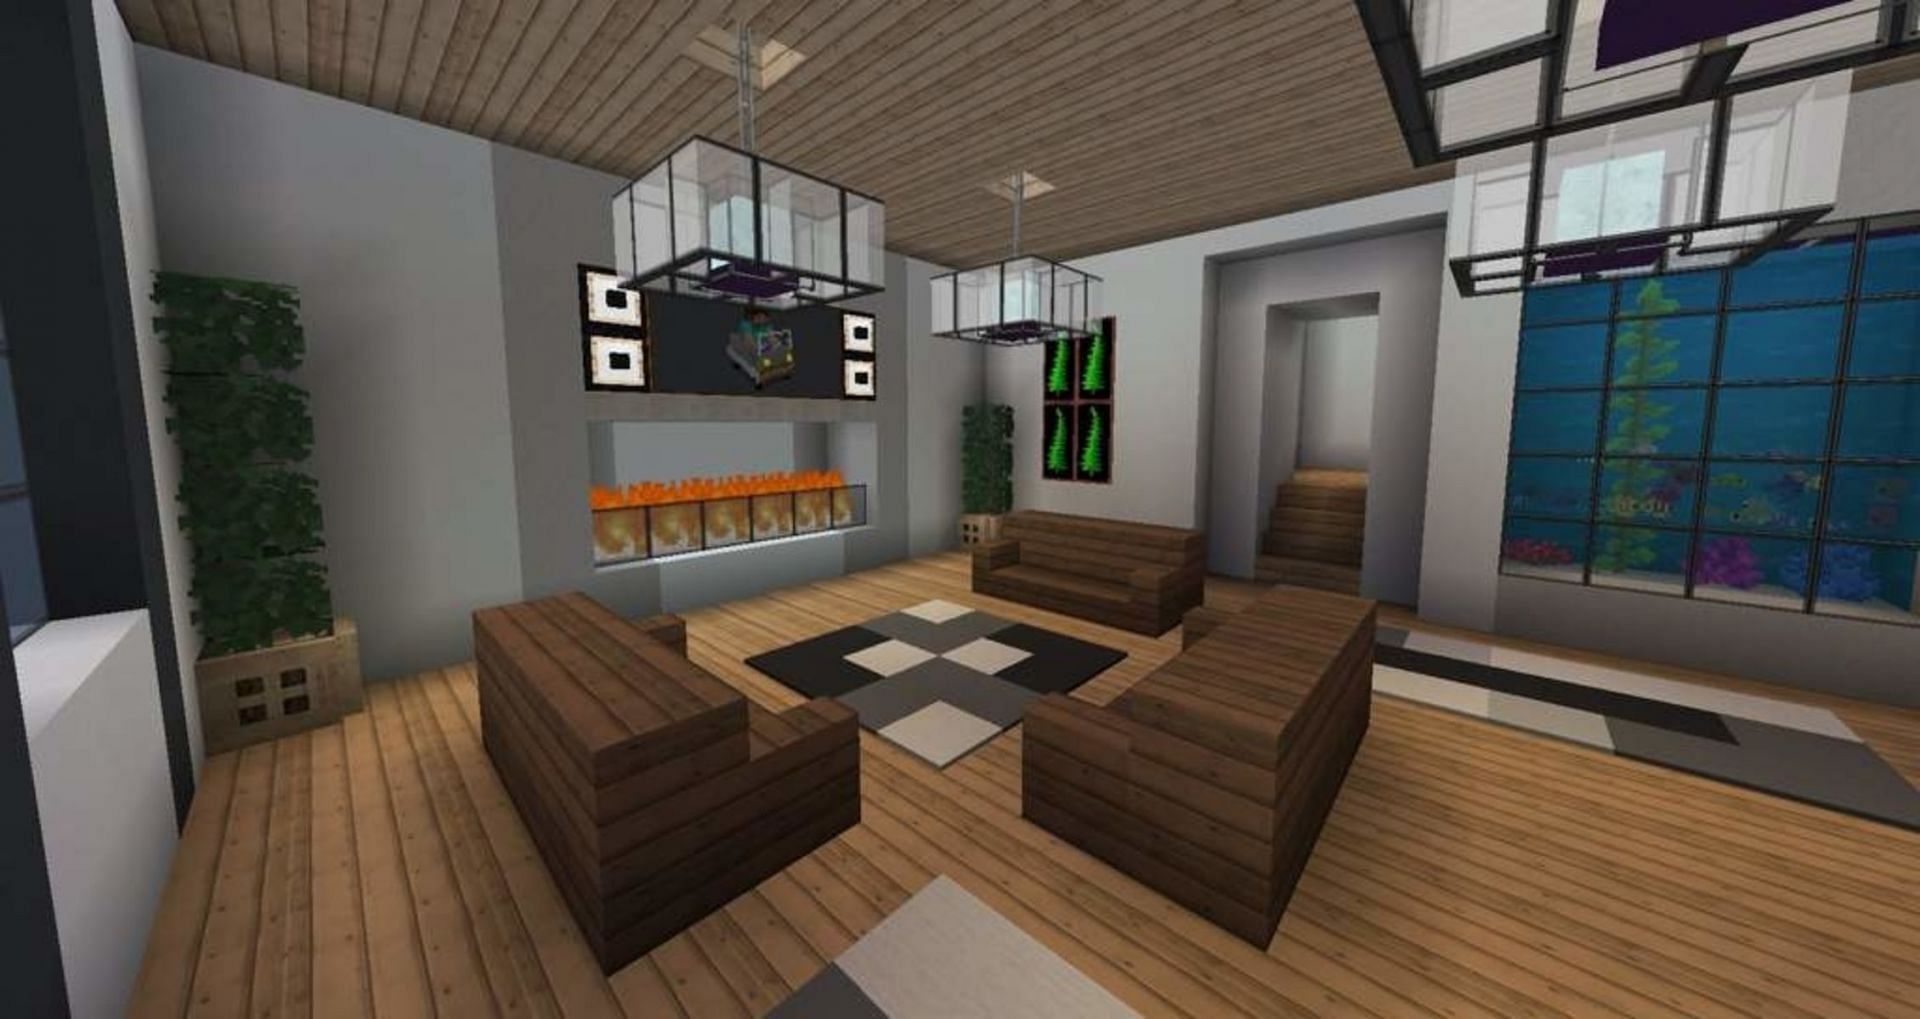 Assorted wood plank flooring found in a modern home&#039;s decor (Image via Mojang)